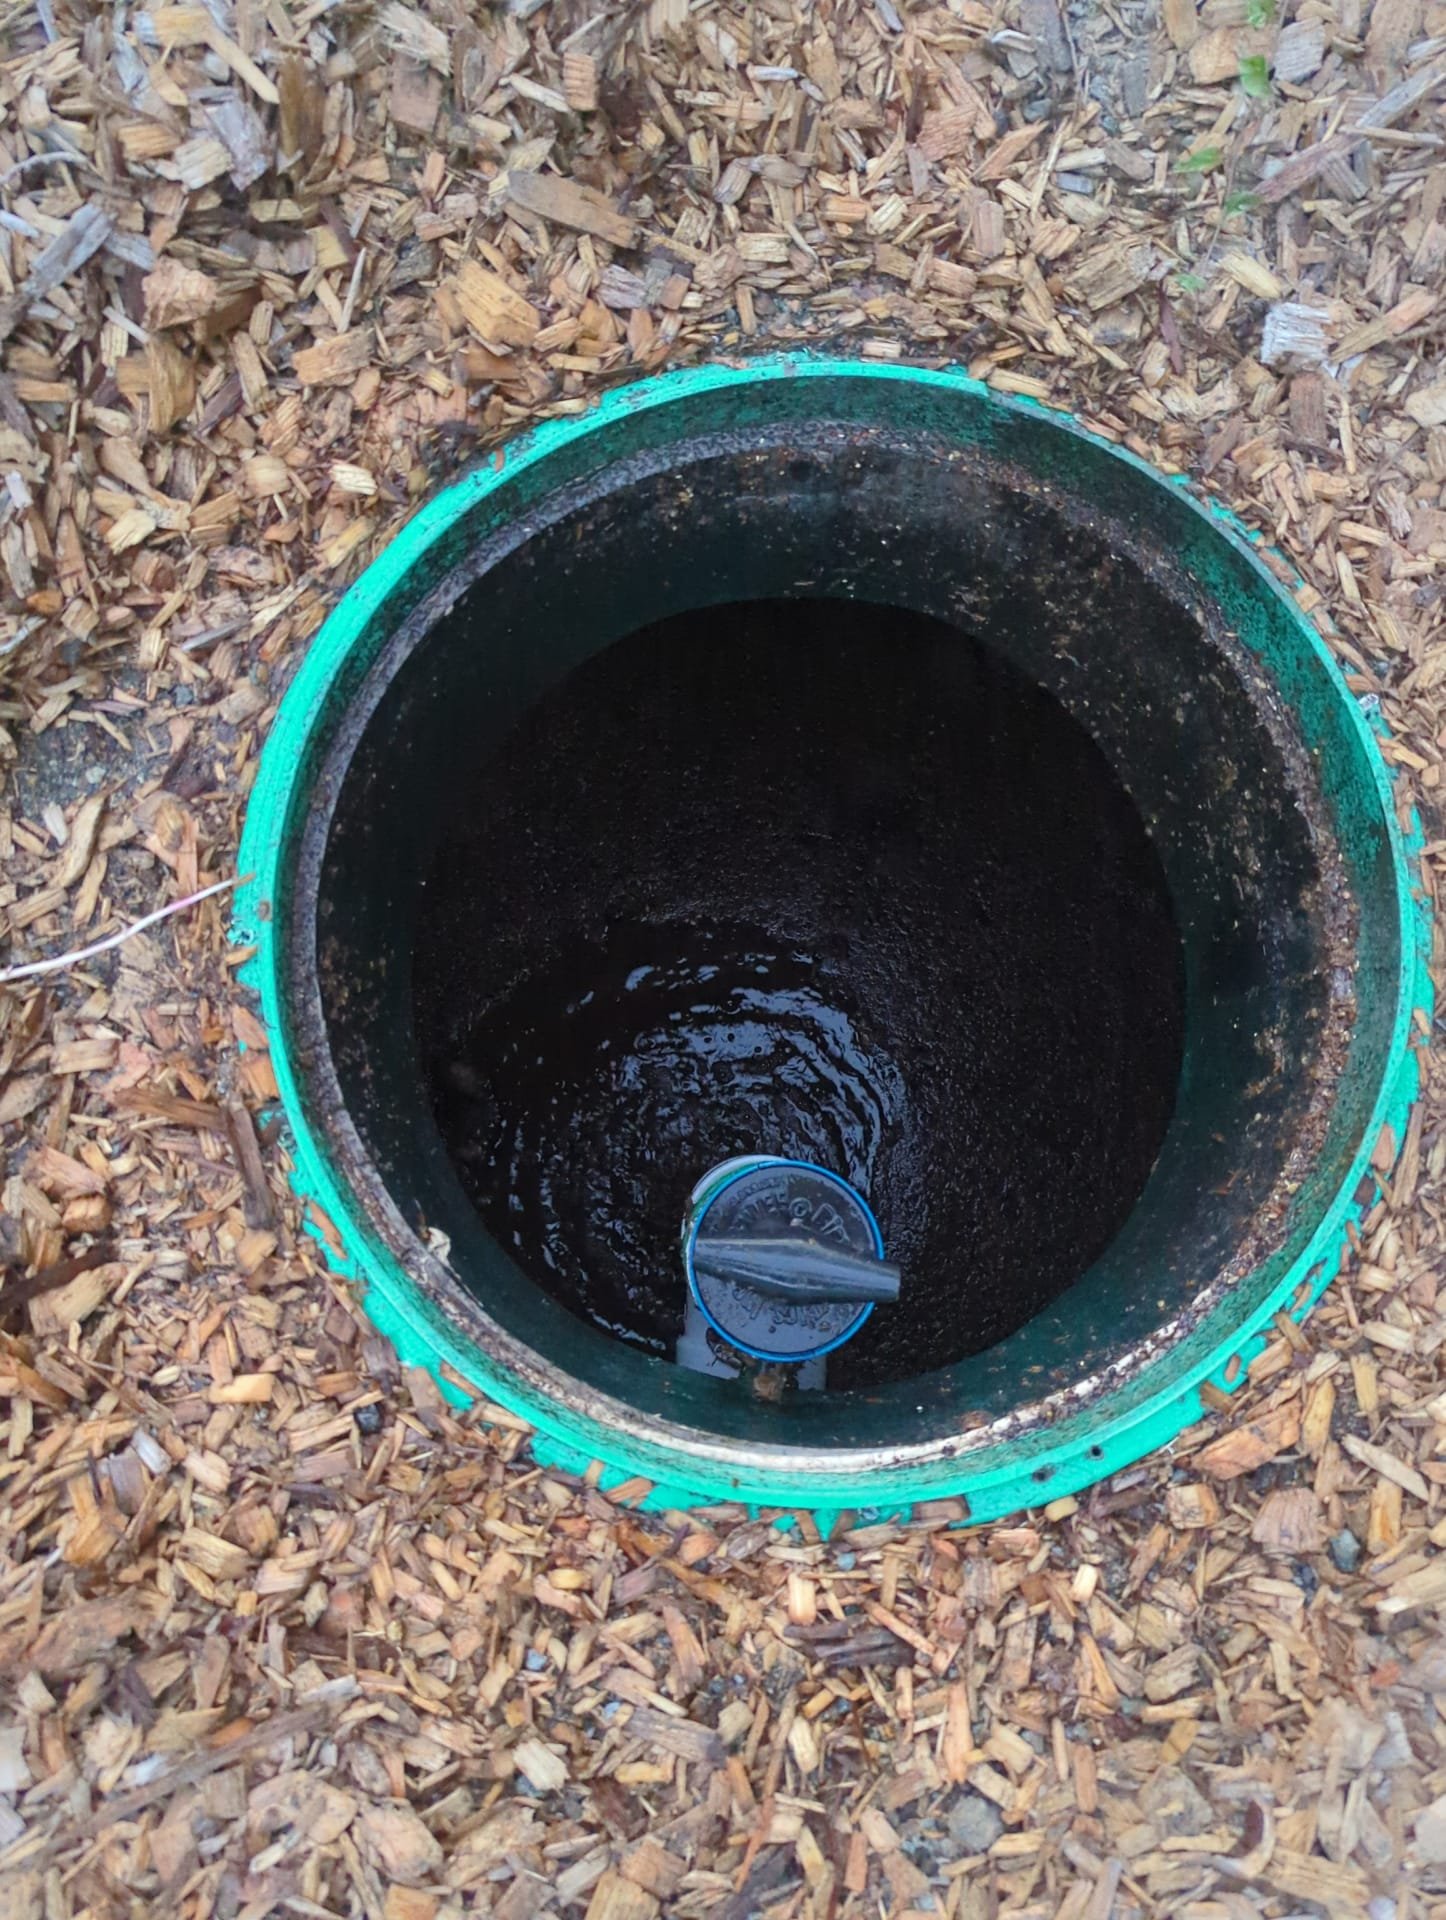 Give Us a Call For Septic Repair in Arlington